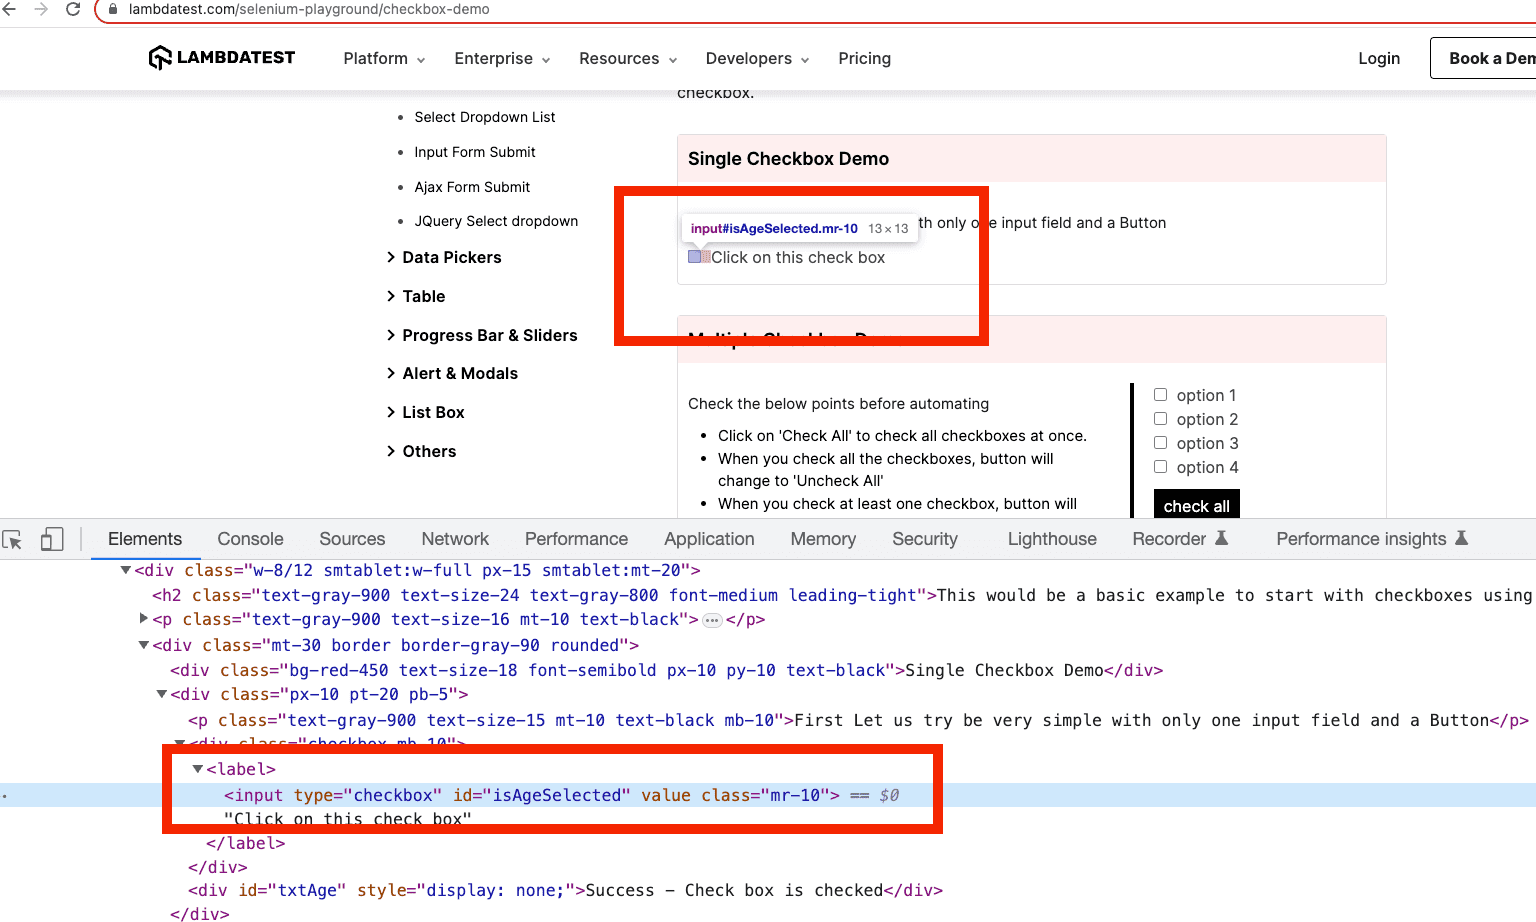 Screenshot illustrating the use of Cypress commands cyget and check to select and check checkboxes on a webpage